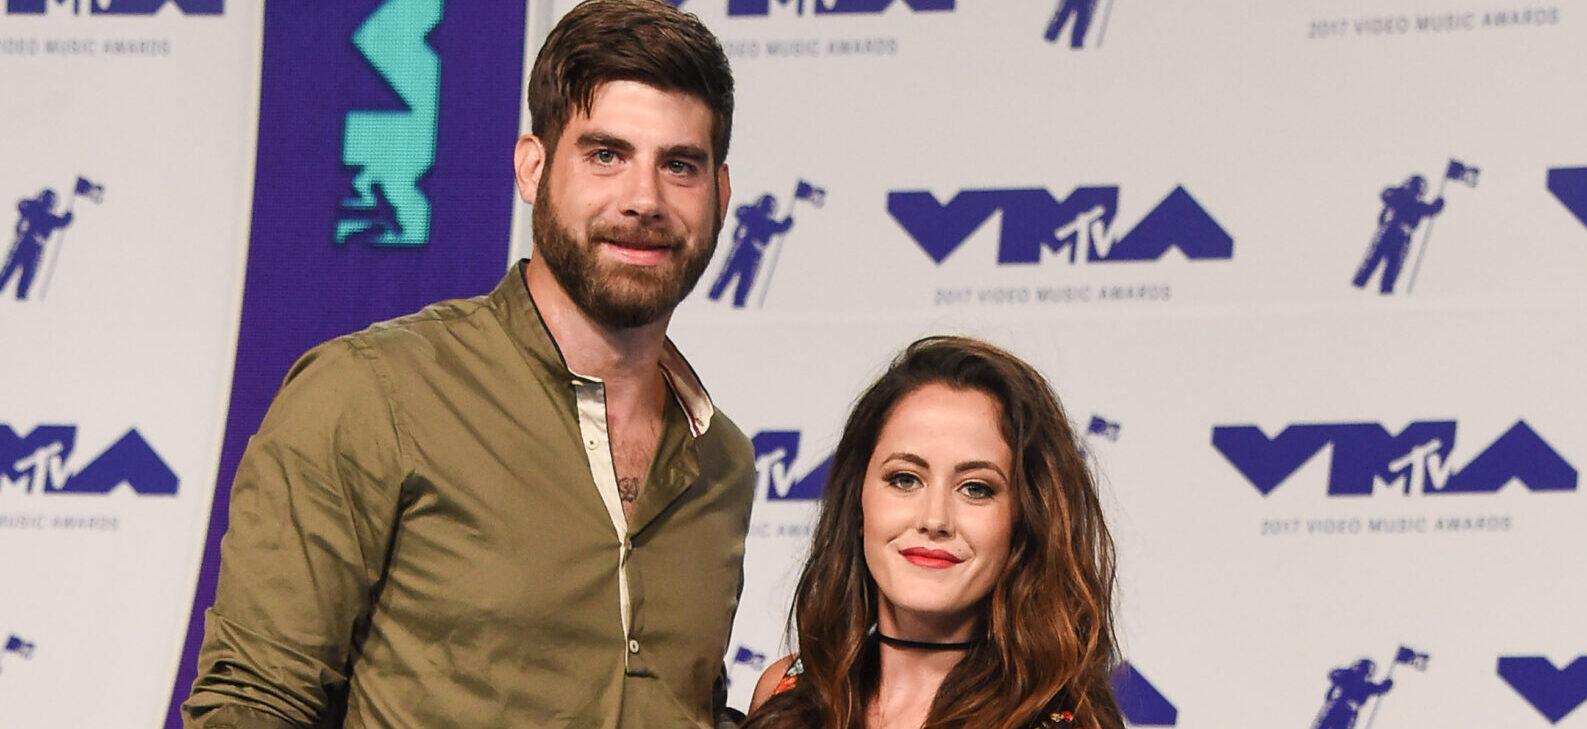 ‘Teen Mom’ Jenelle Evans Cutting Daughter’s Hair Sparks Concern